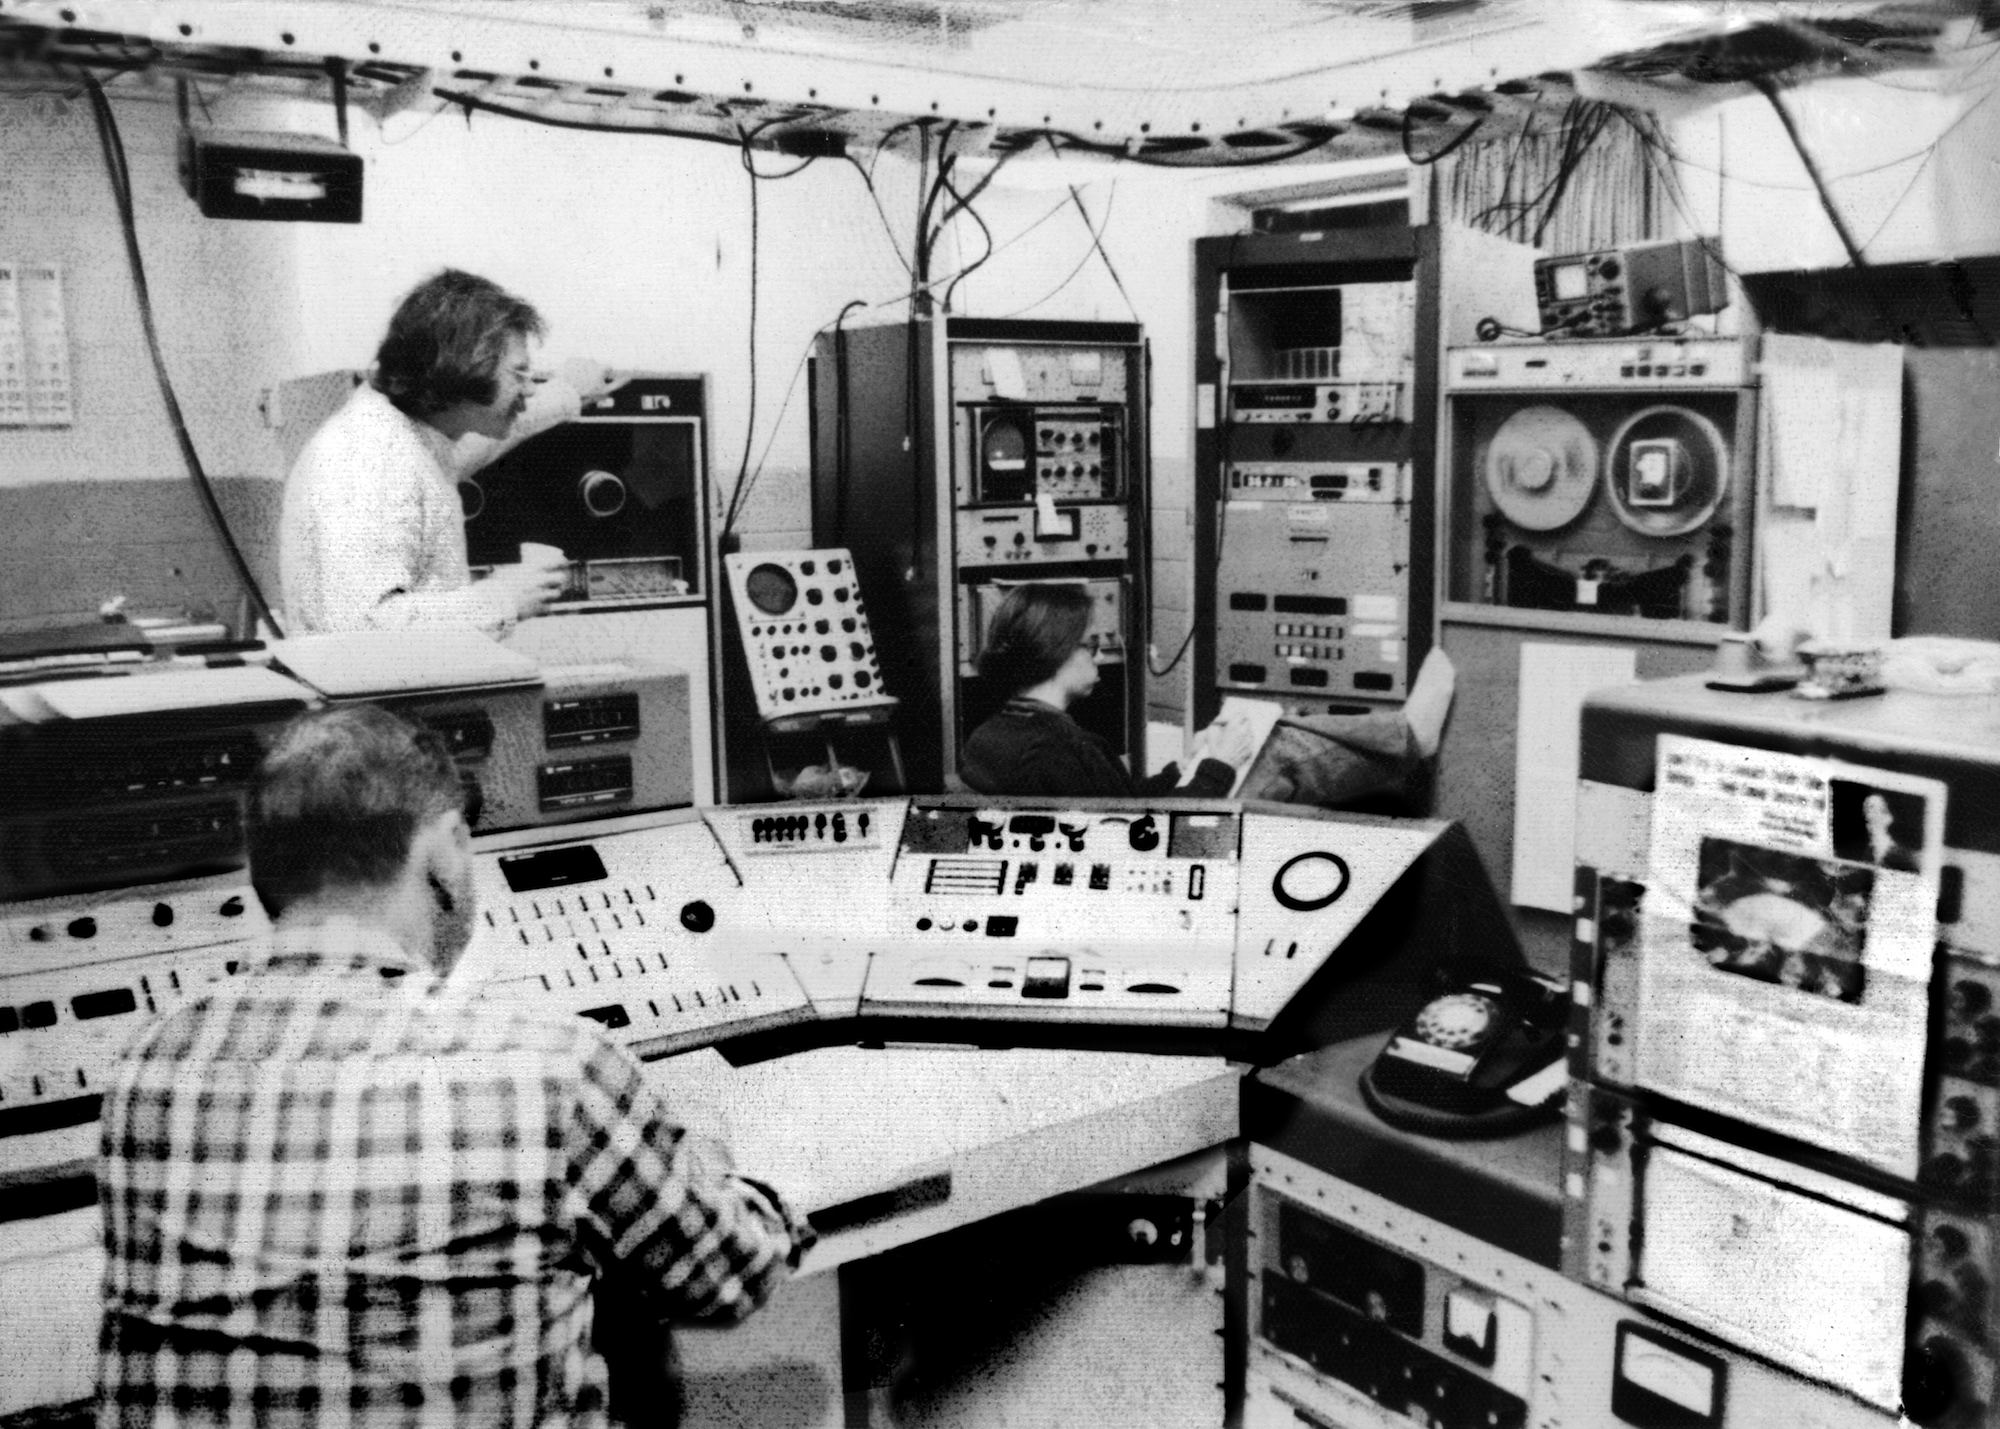 Tarter (background) gets comfortable in the control room at the National Radio Astronomy Observatory in 1976.